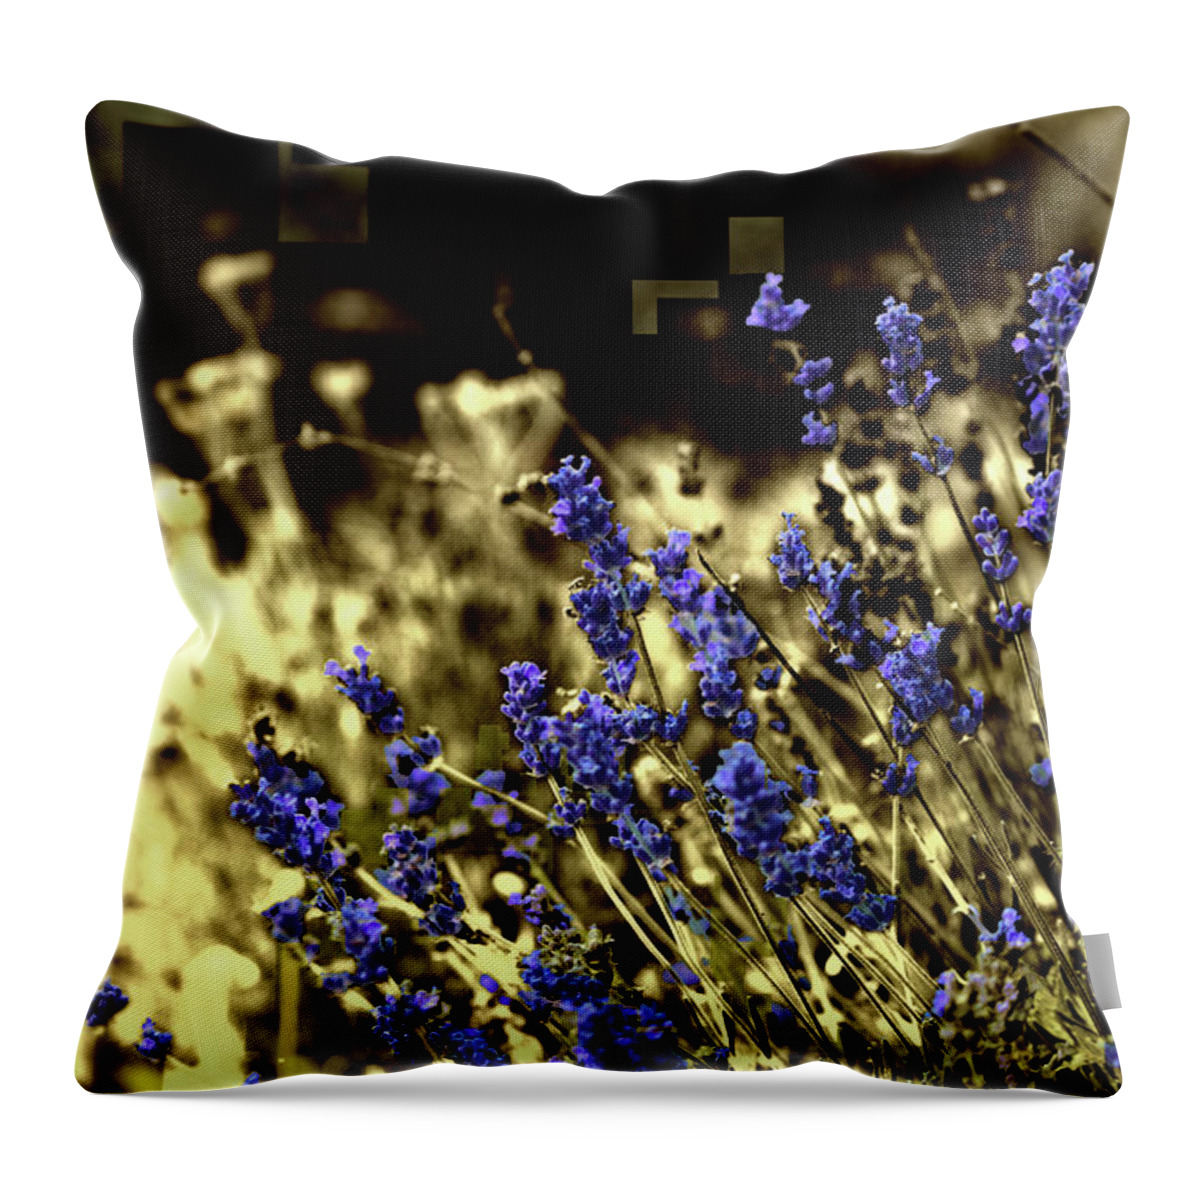 Purple Throw Pillow featuring the photograph Lavender Yellow by April Burton